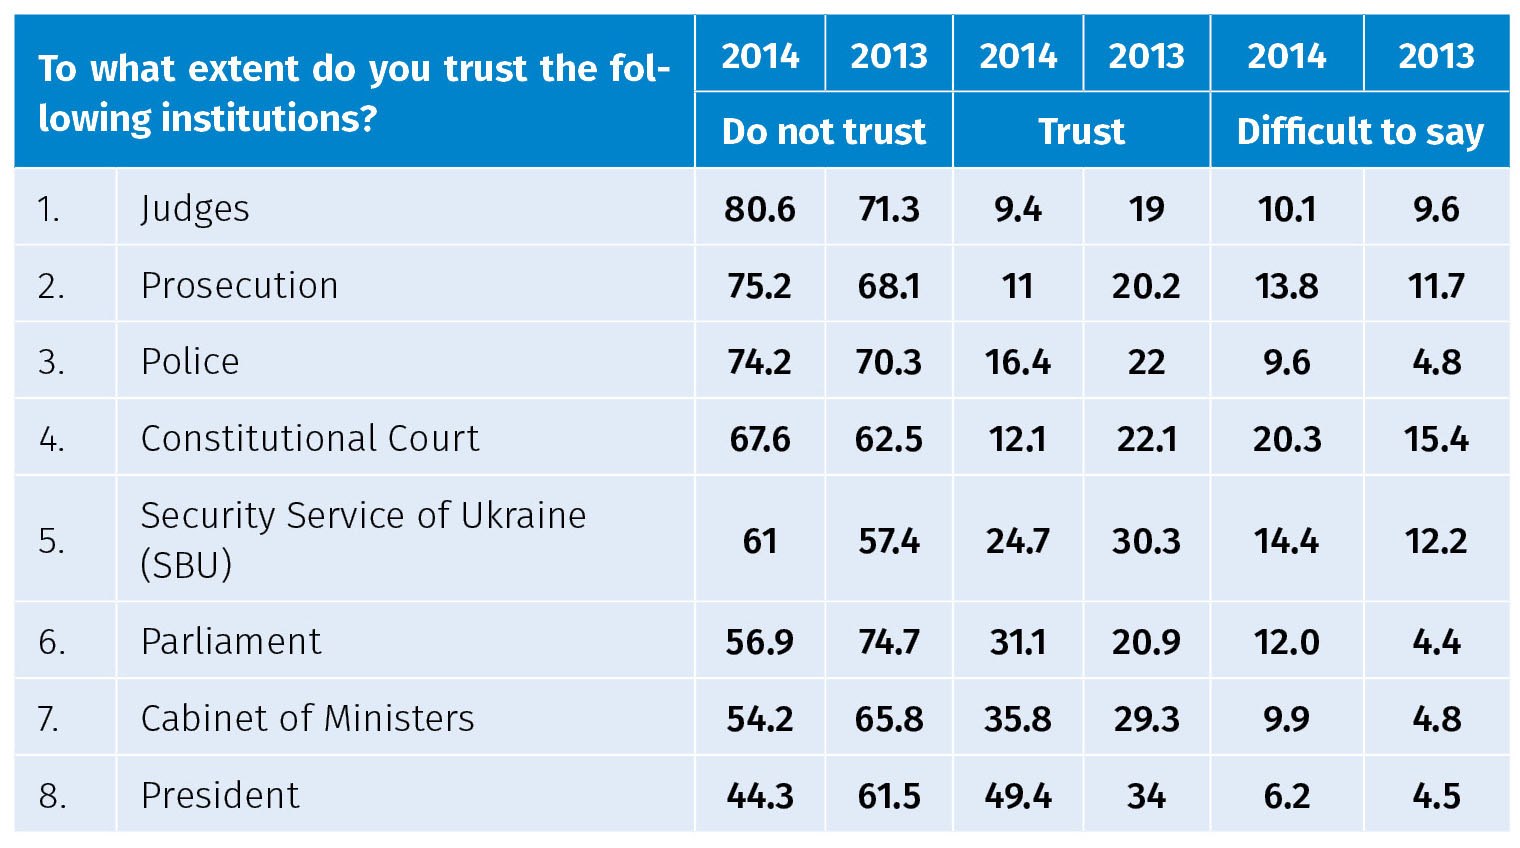 “To what extent do you trust the following institutions?”